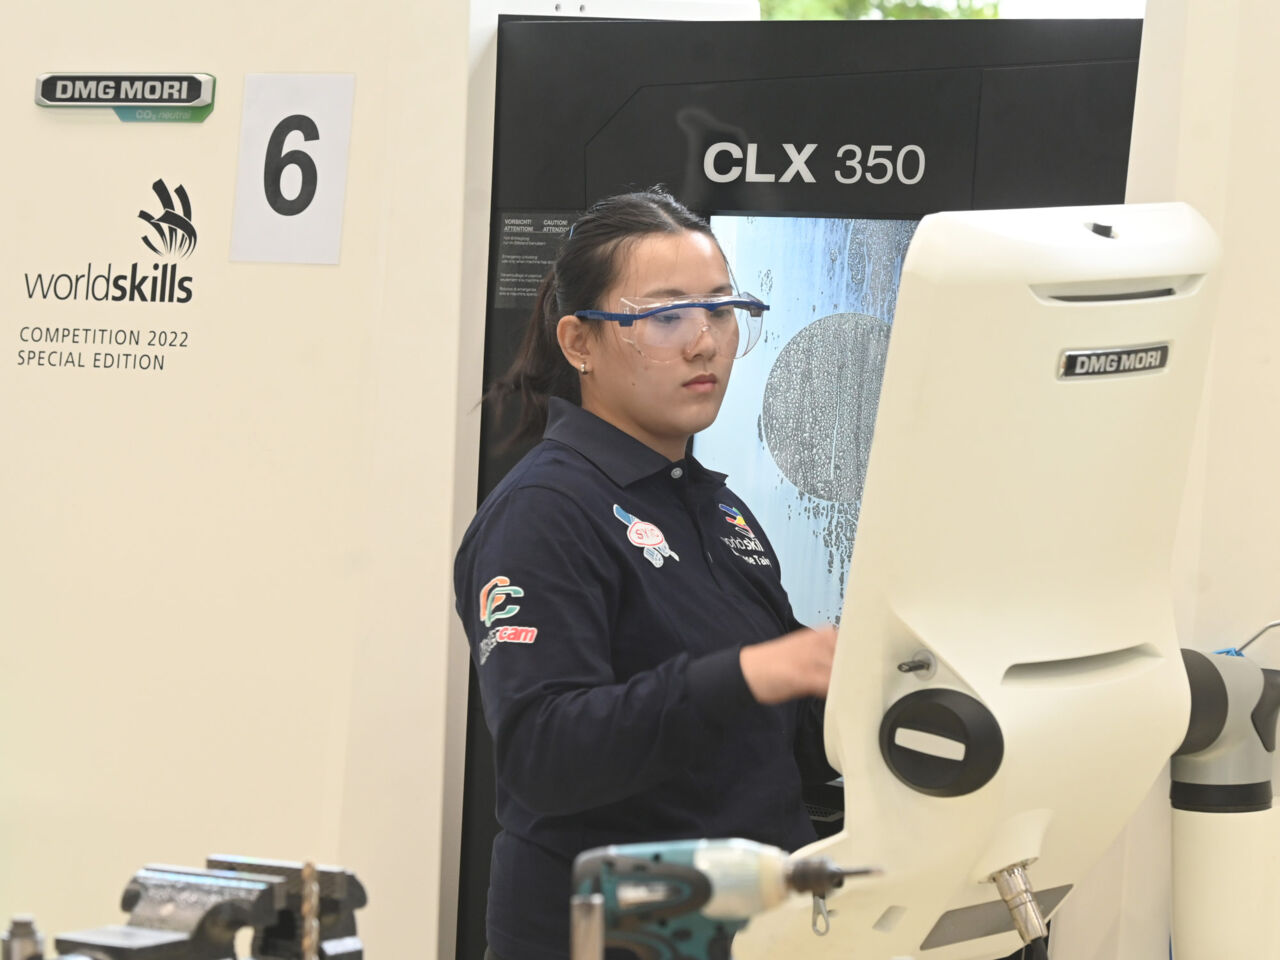 Global Industry Partners open their facilities to host WorldSkills Competition 2022 Special Edition